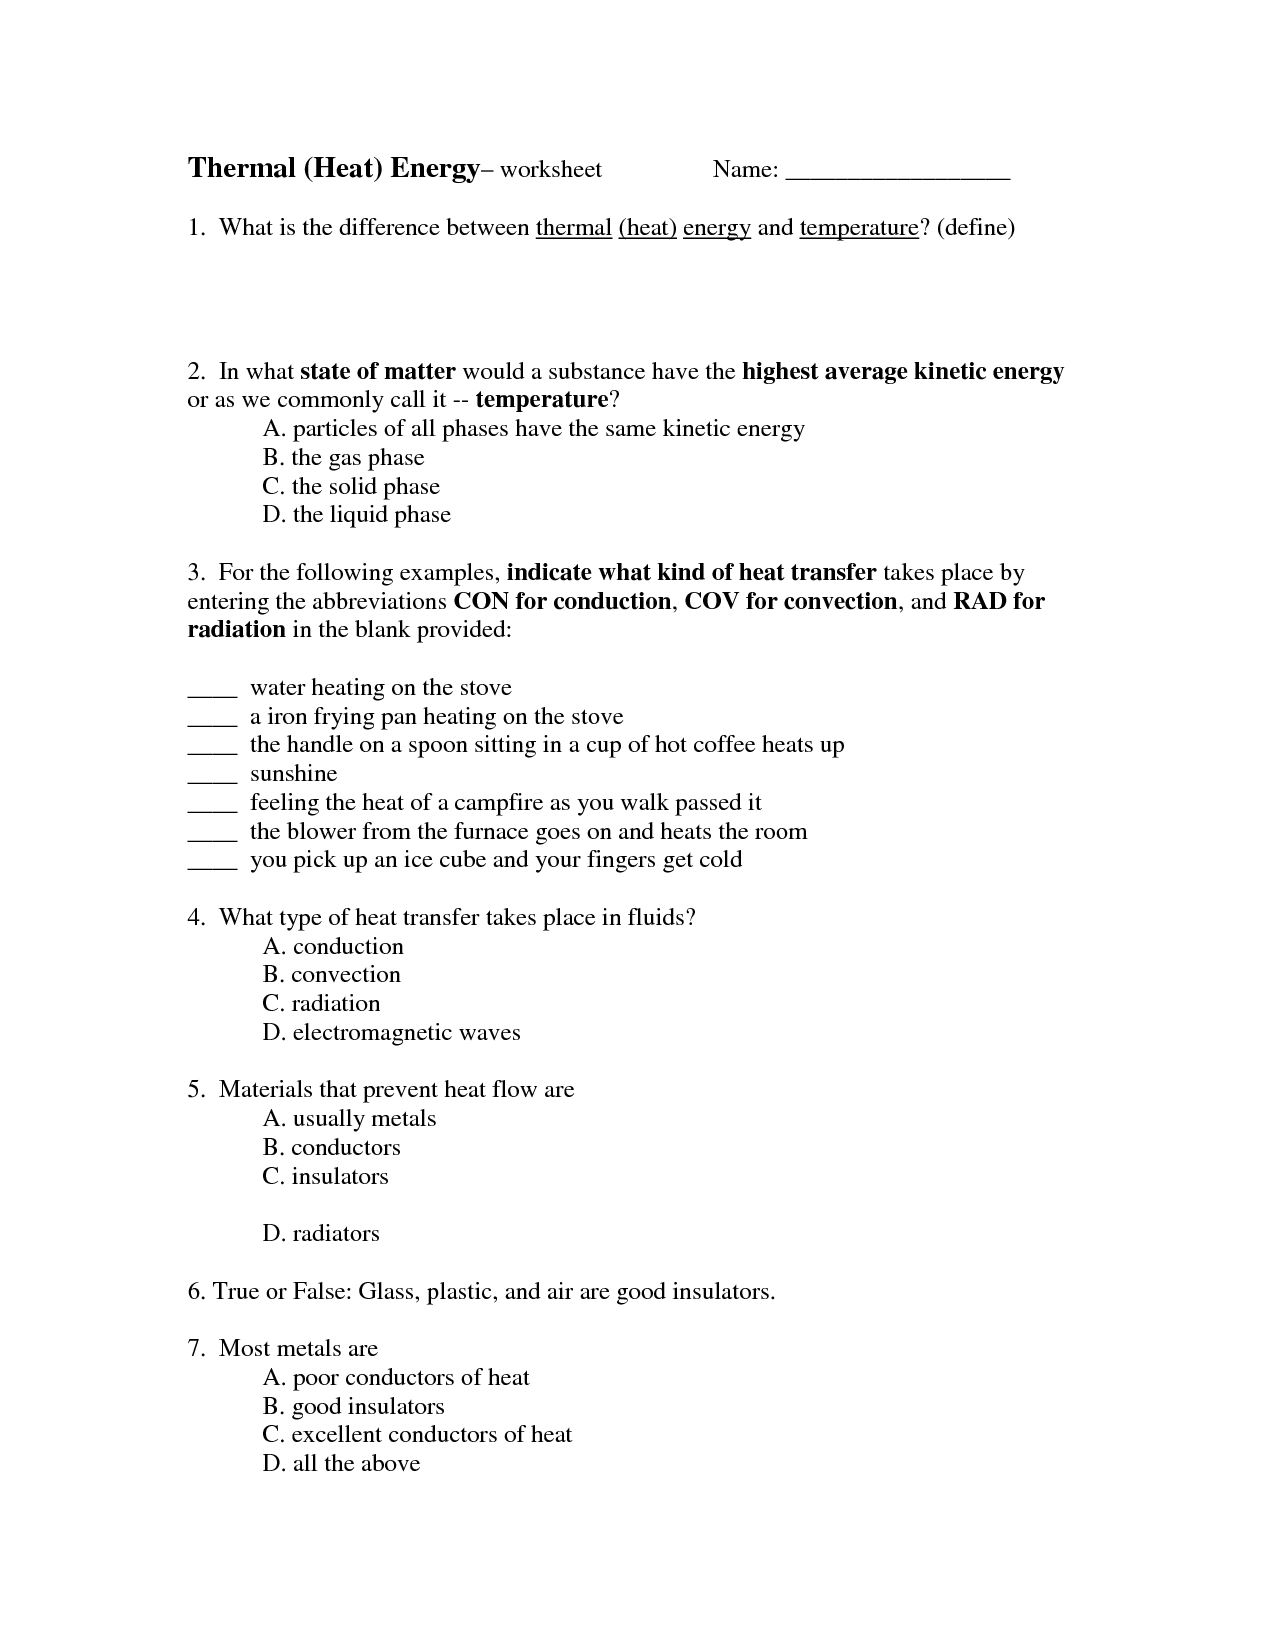 12 Best Images of Heat And Temperature Worksheets - Temperature and